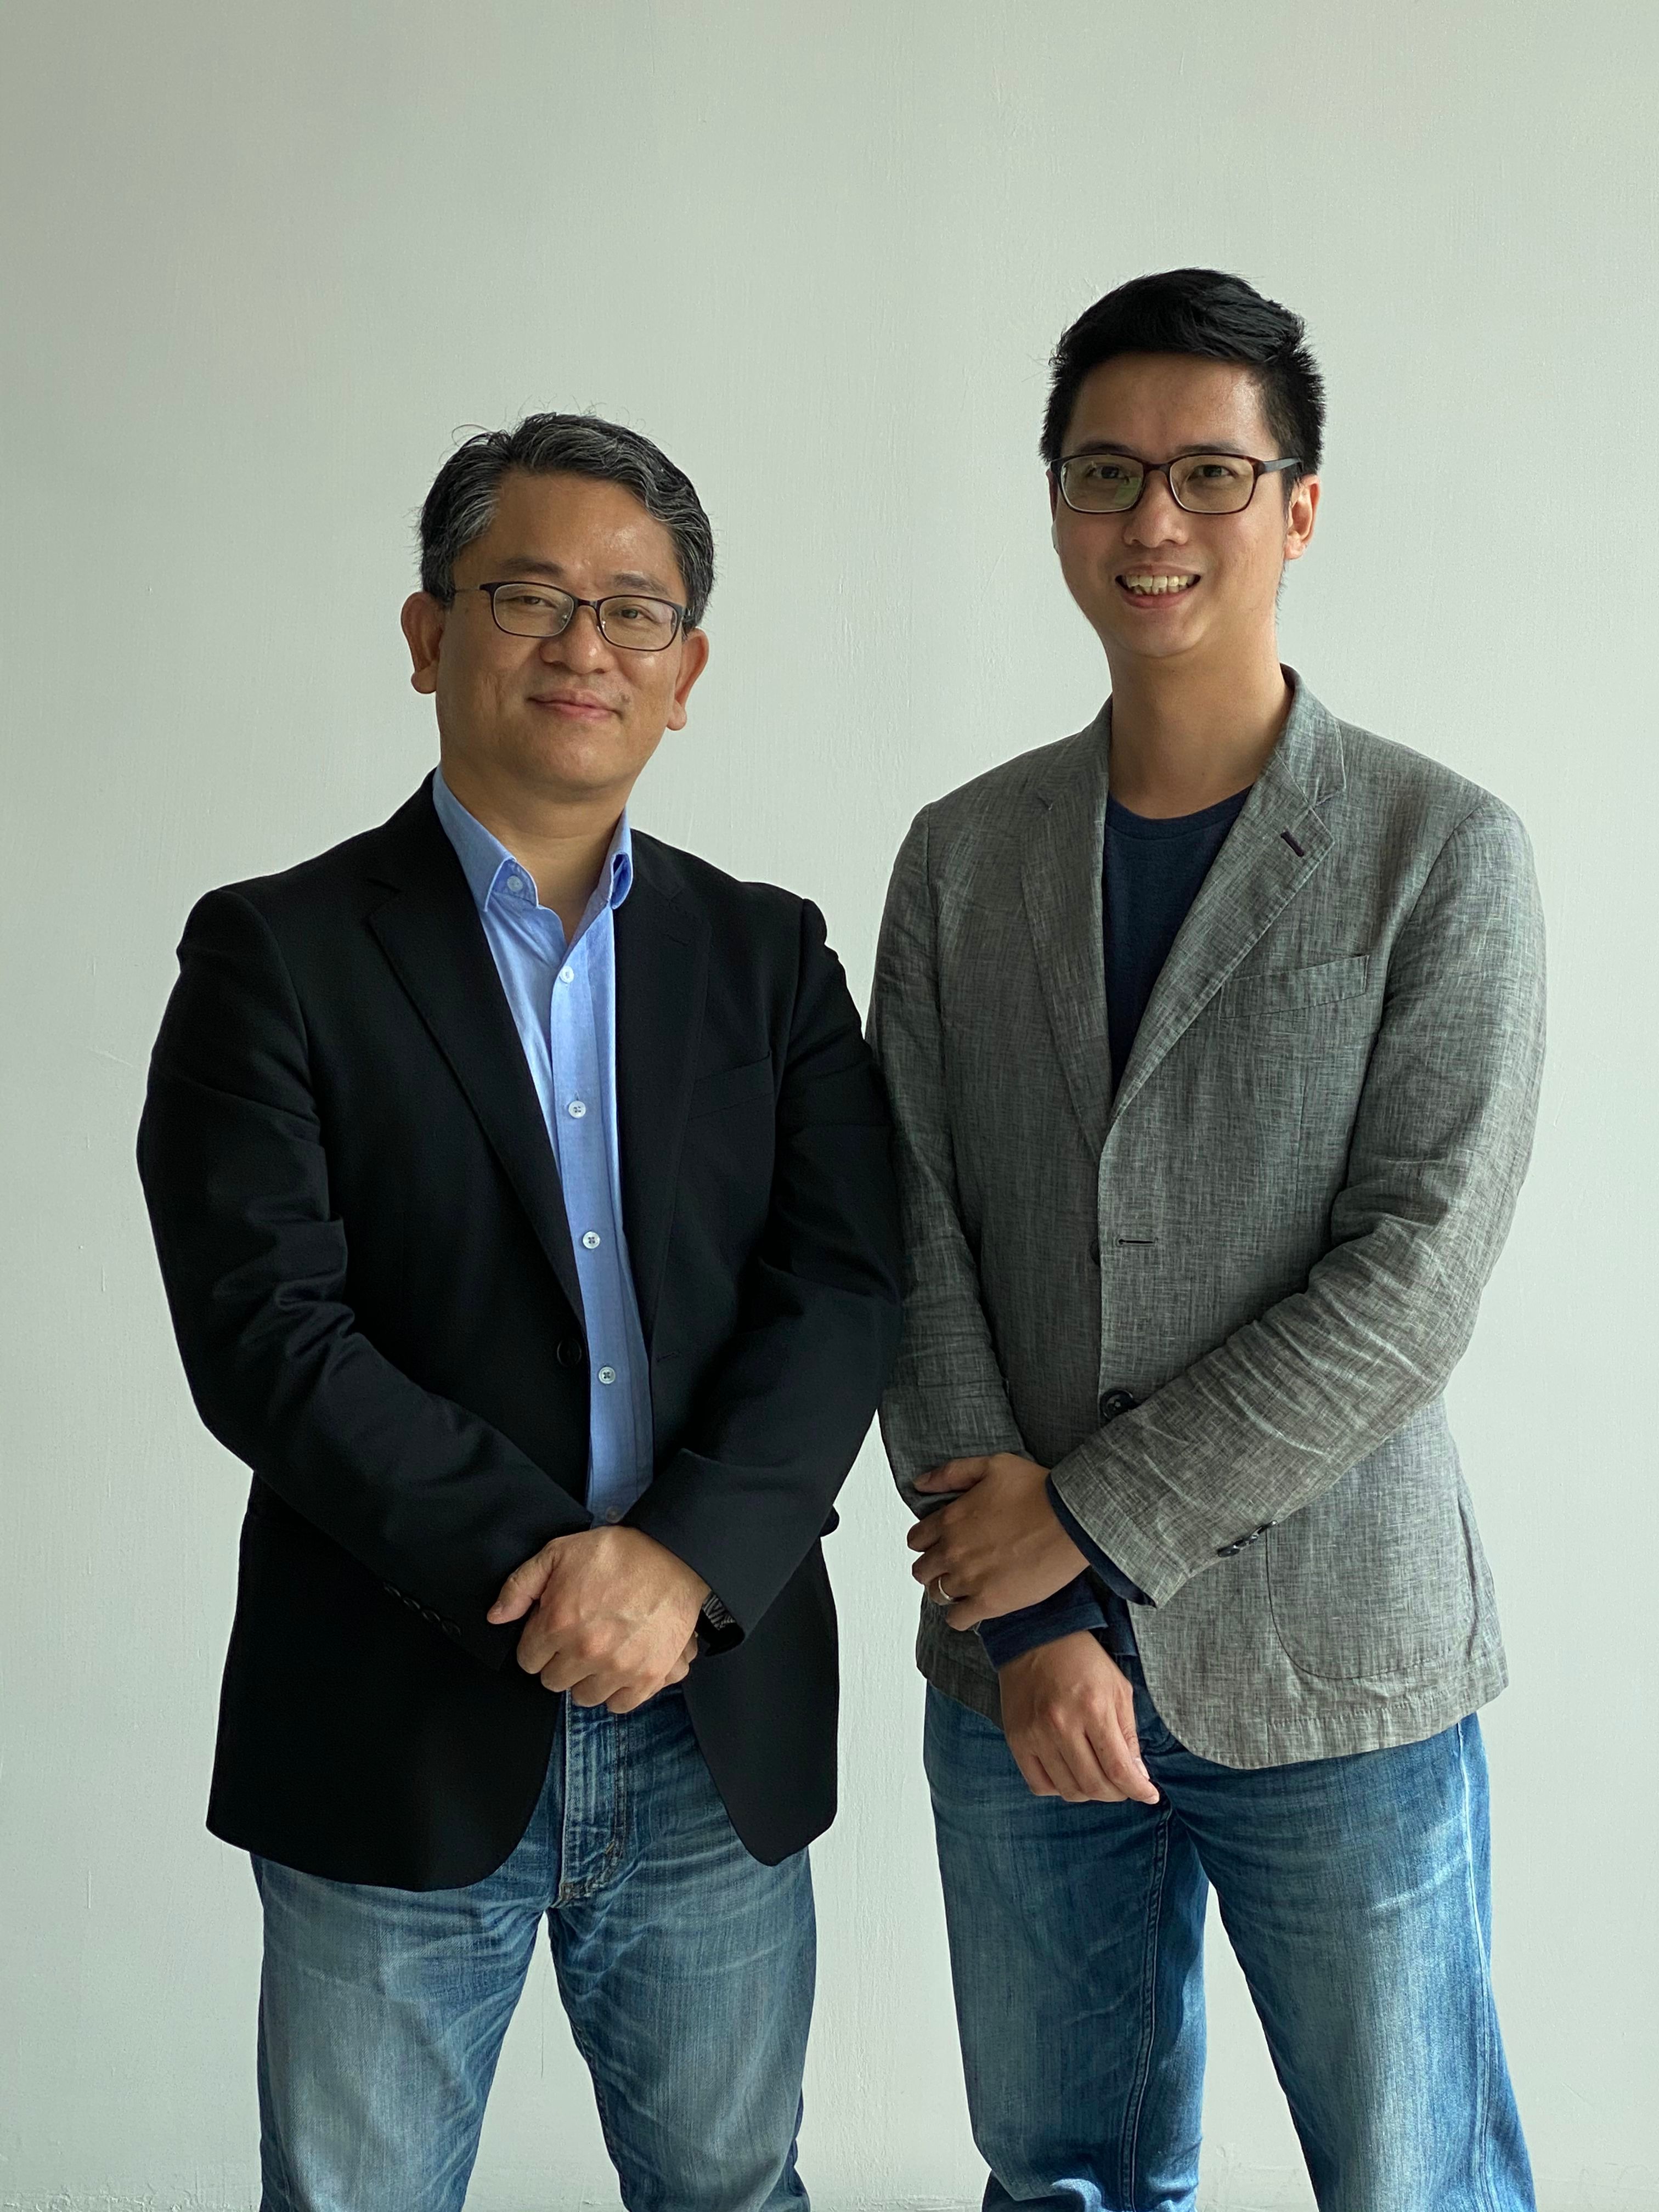 Indoor mapping solution sees a bright future, say Dr. John Chan and Ocean Ng (from left to right), founders and co-founder of Maphive (Mapxus), a tech startup in Hong Kong.